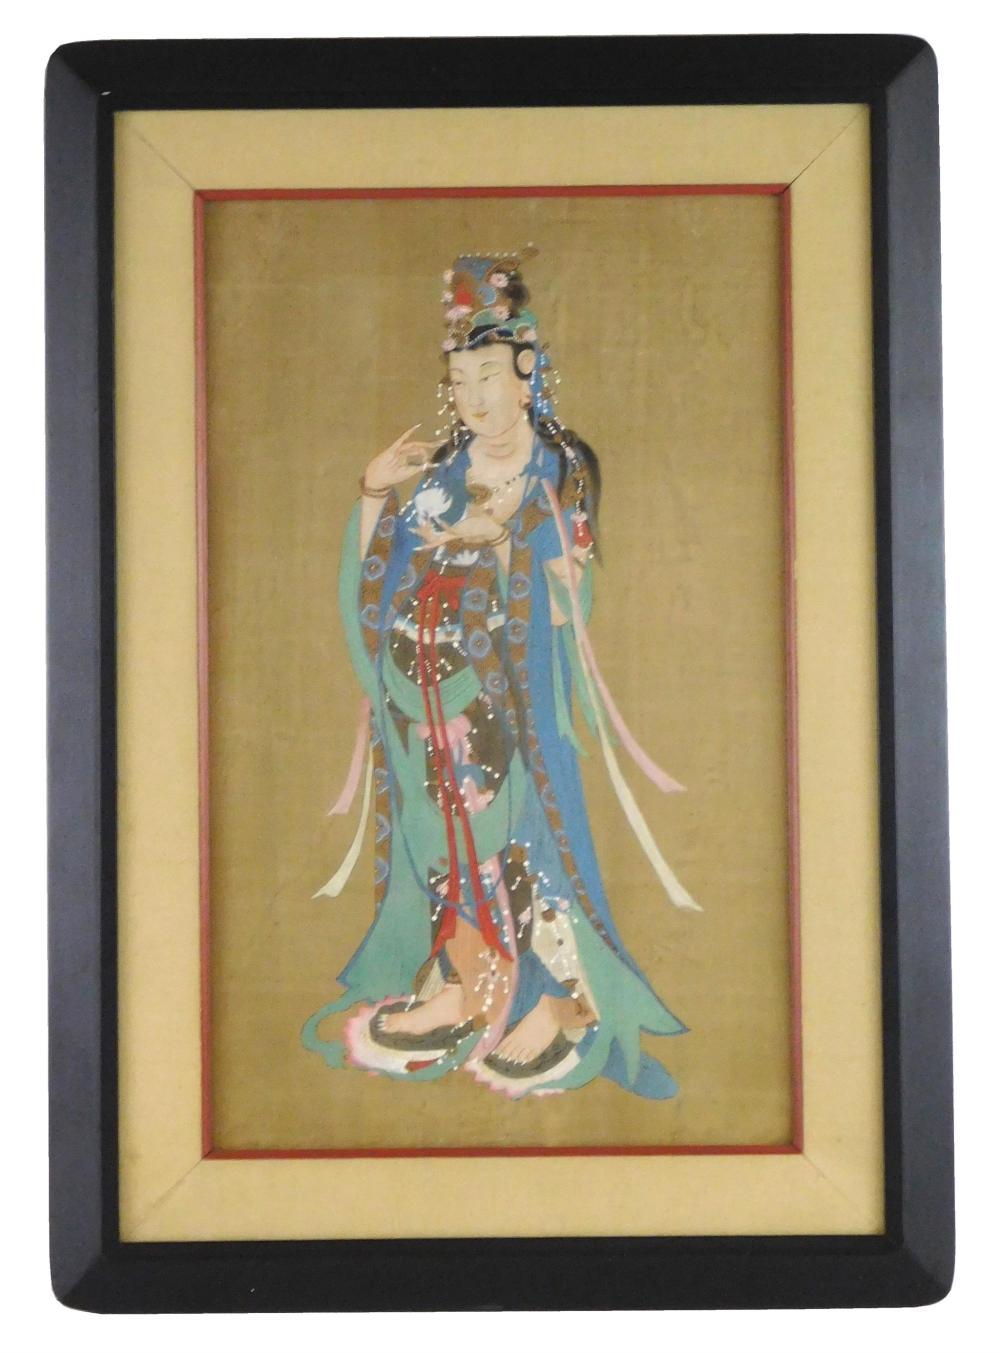 PORTRAIT OF CHINESE DEITY, WATERCOLOR